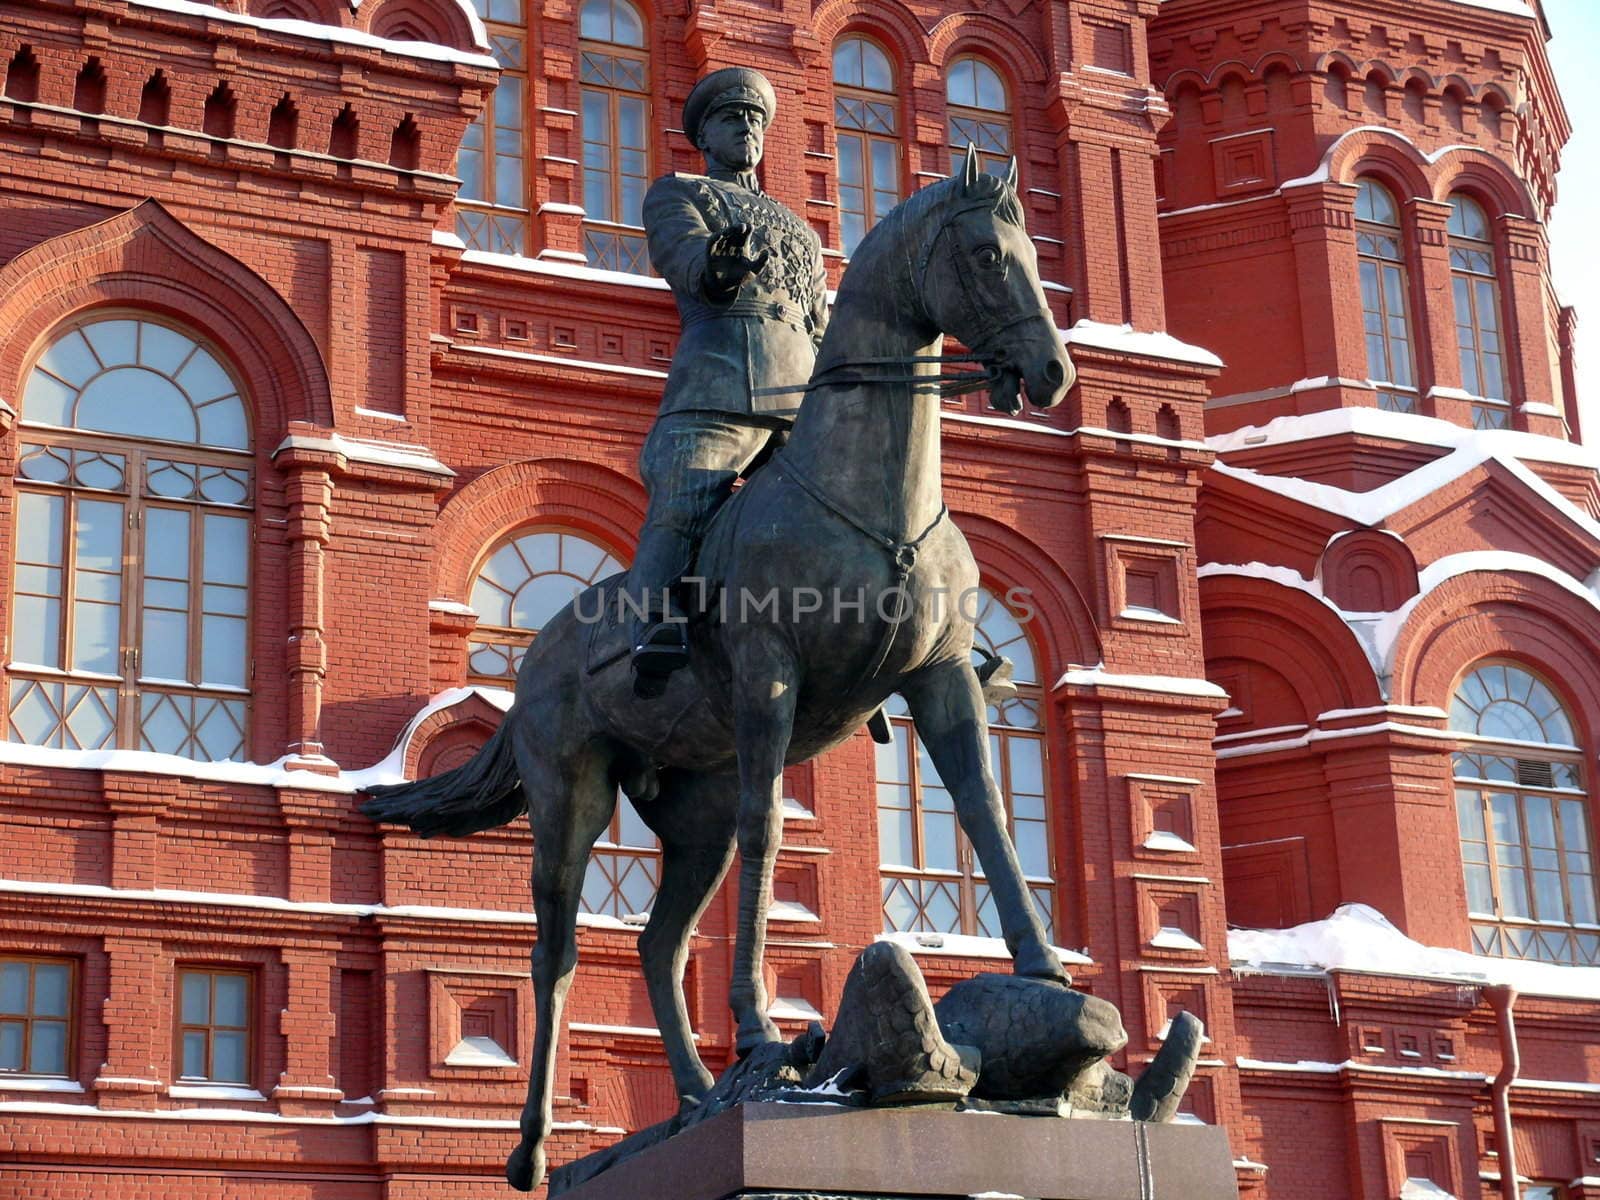 Zhukov monument near National historic musium in Moscow, Russia by Stoyanov